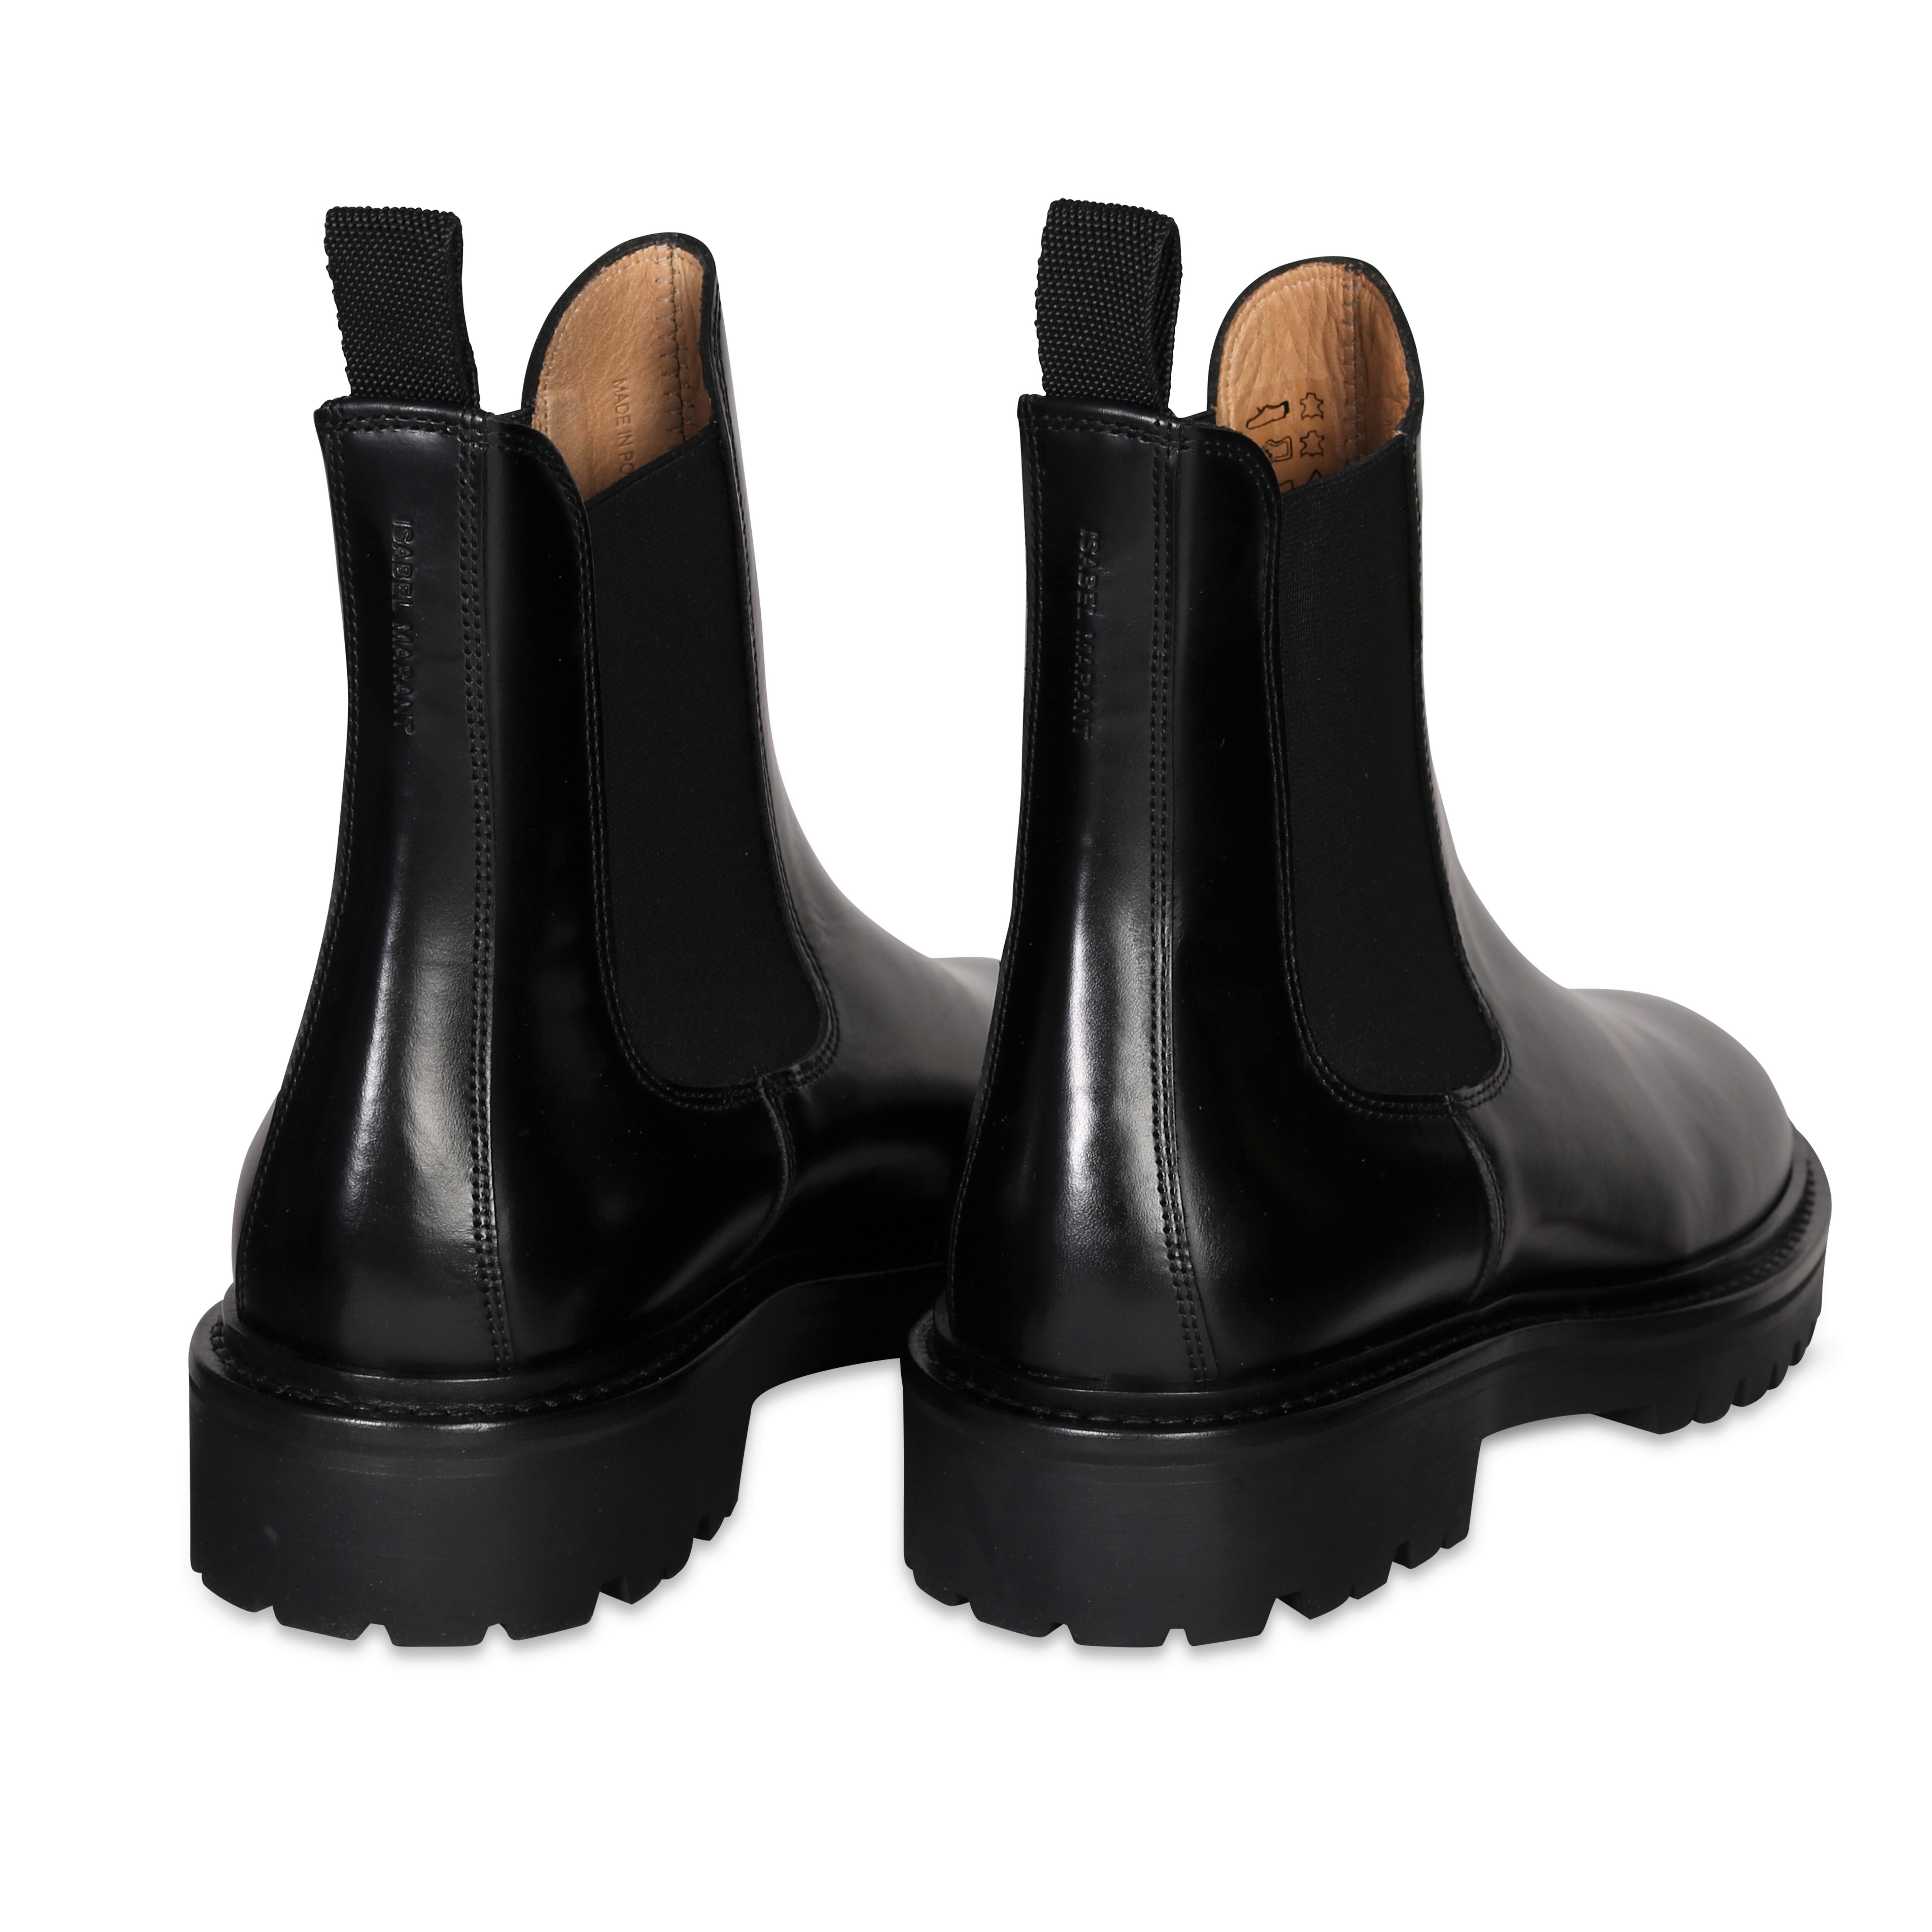 Isabel Marant Castayh Chelsea Boot in Black 40